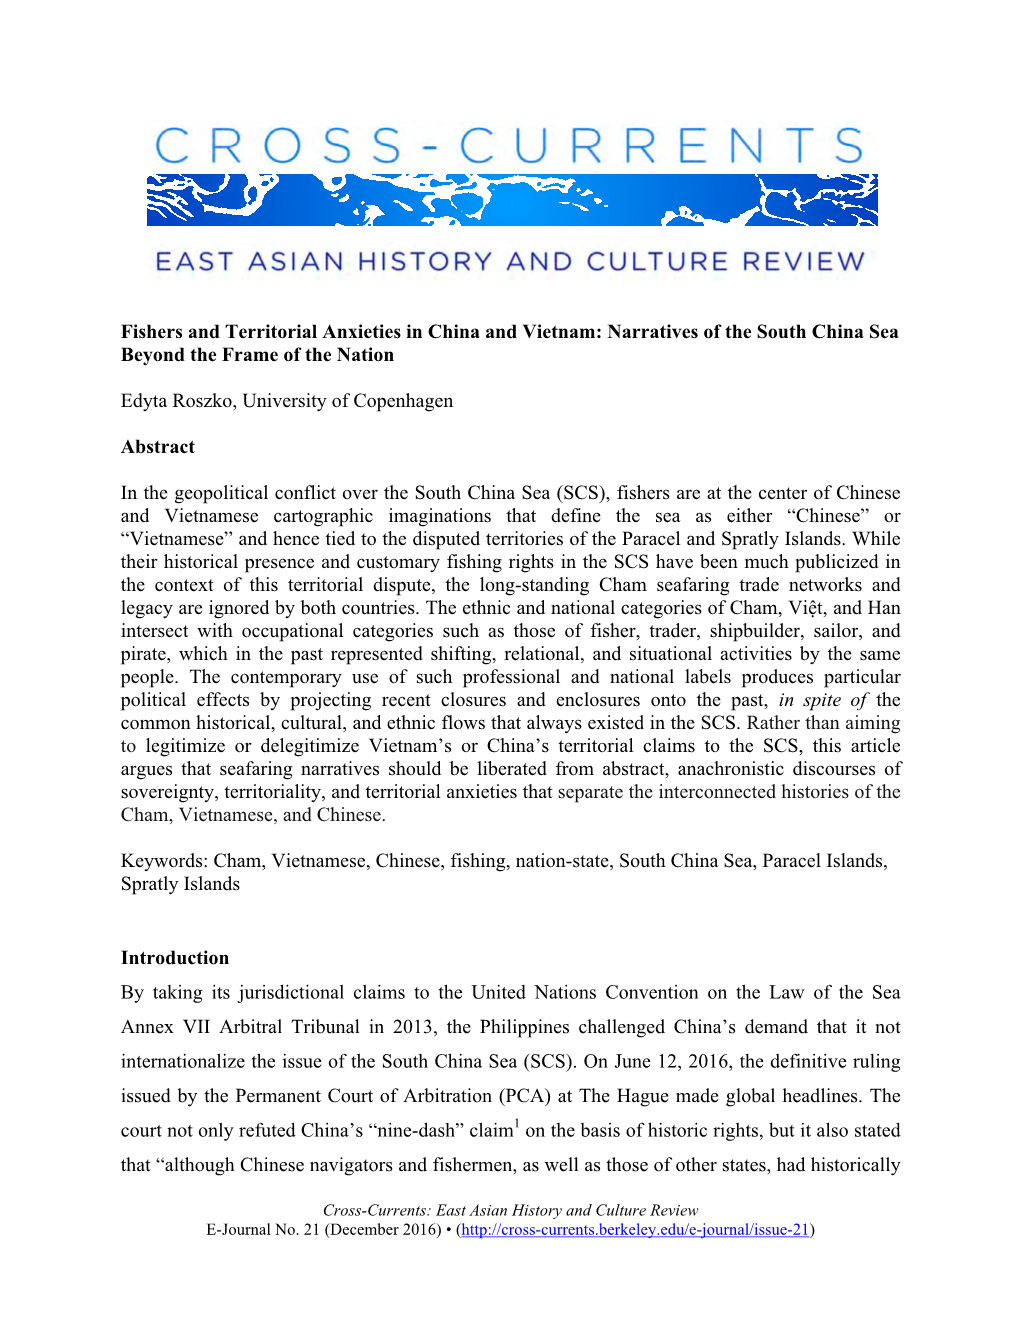 Fishers and Territorial Anxieties in China and Vietnam: Narratives of the South China Sea Beyond the Frame of the Nation